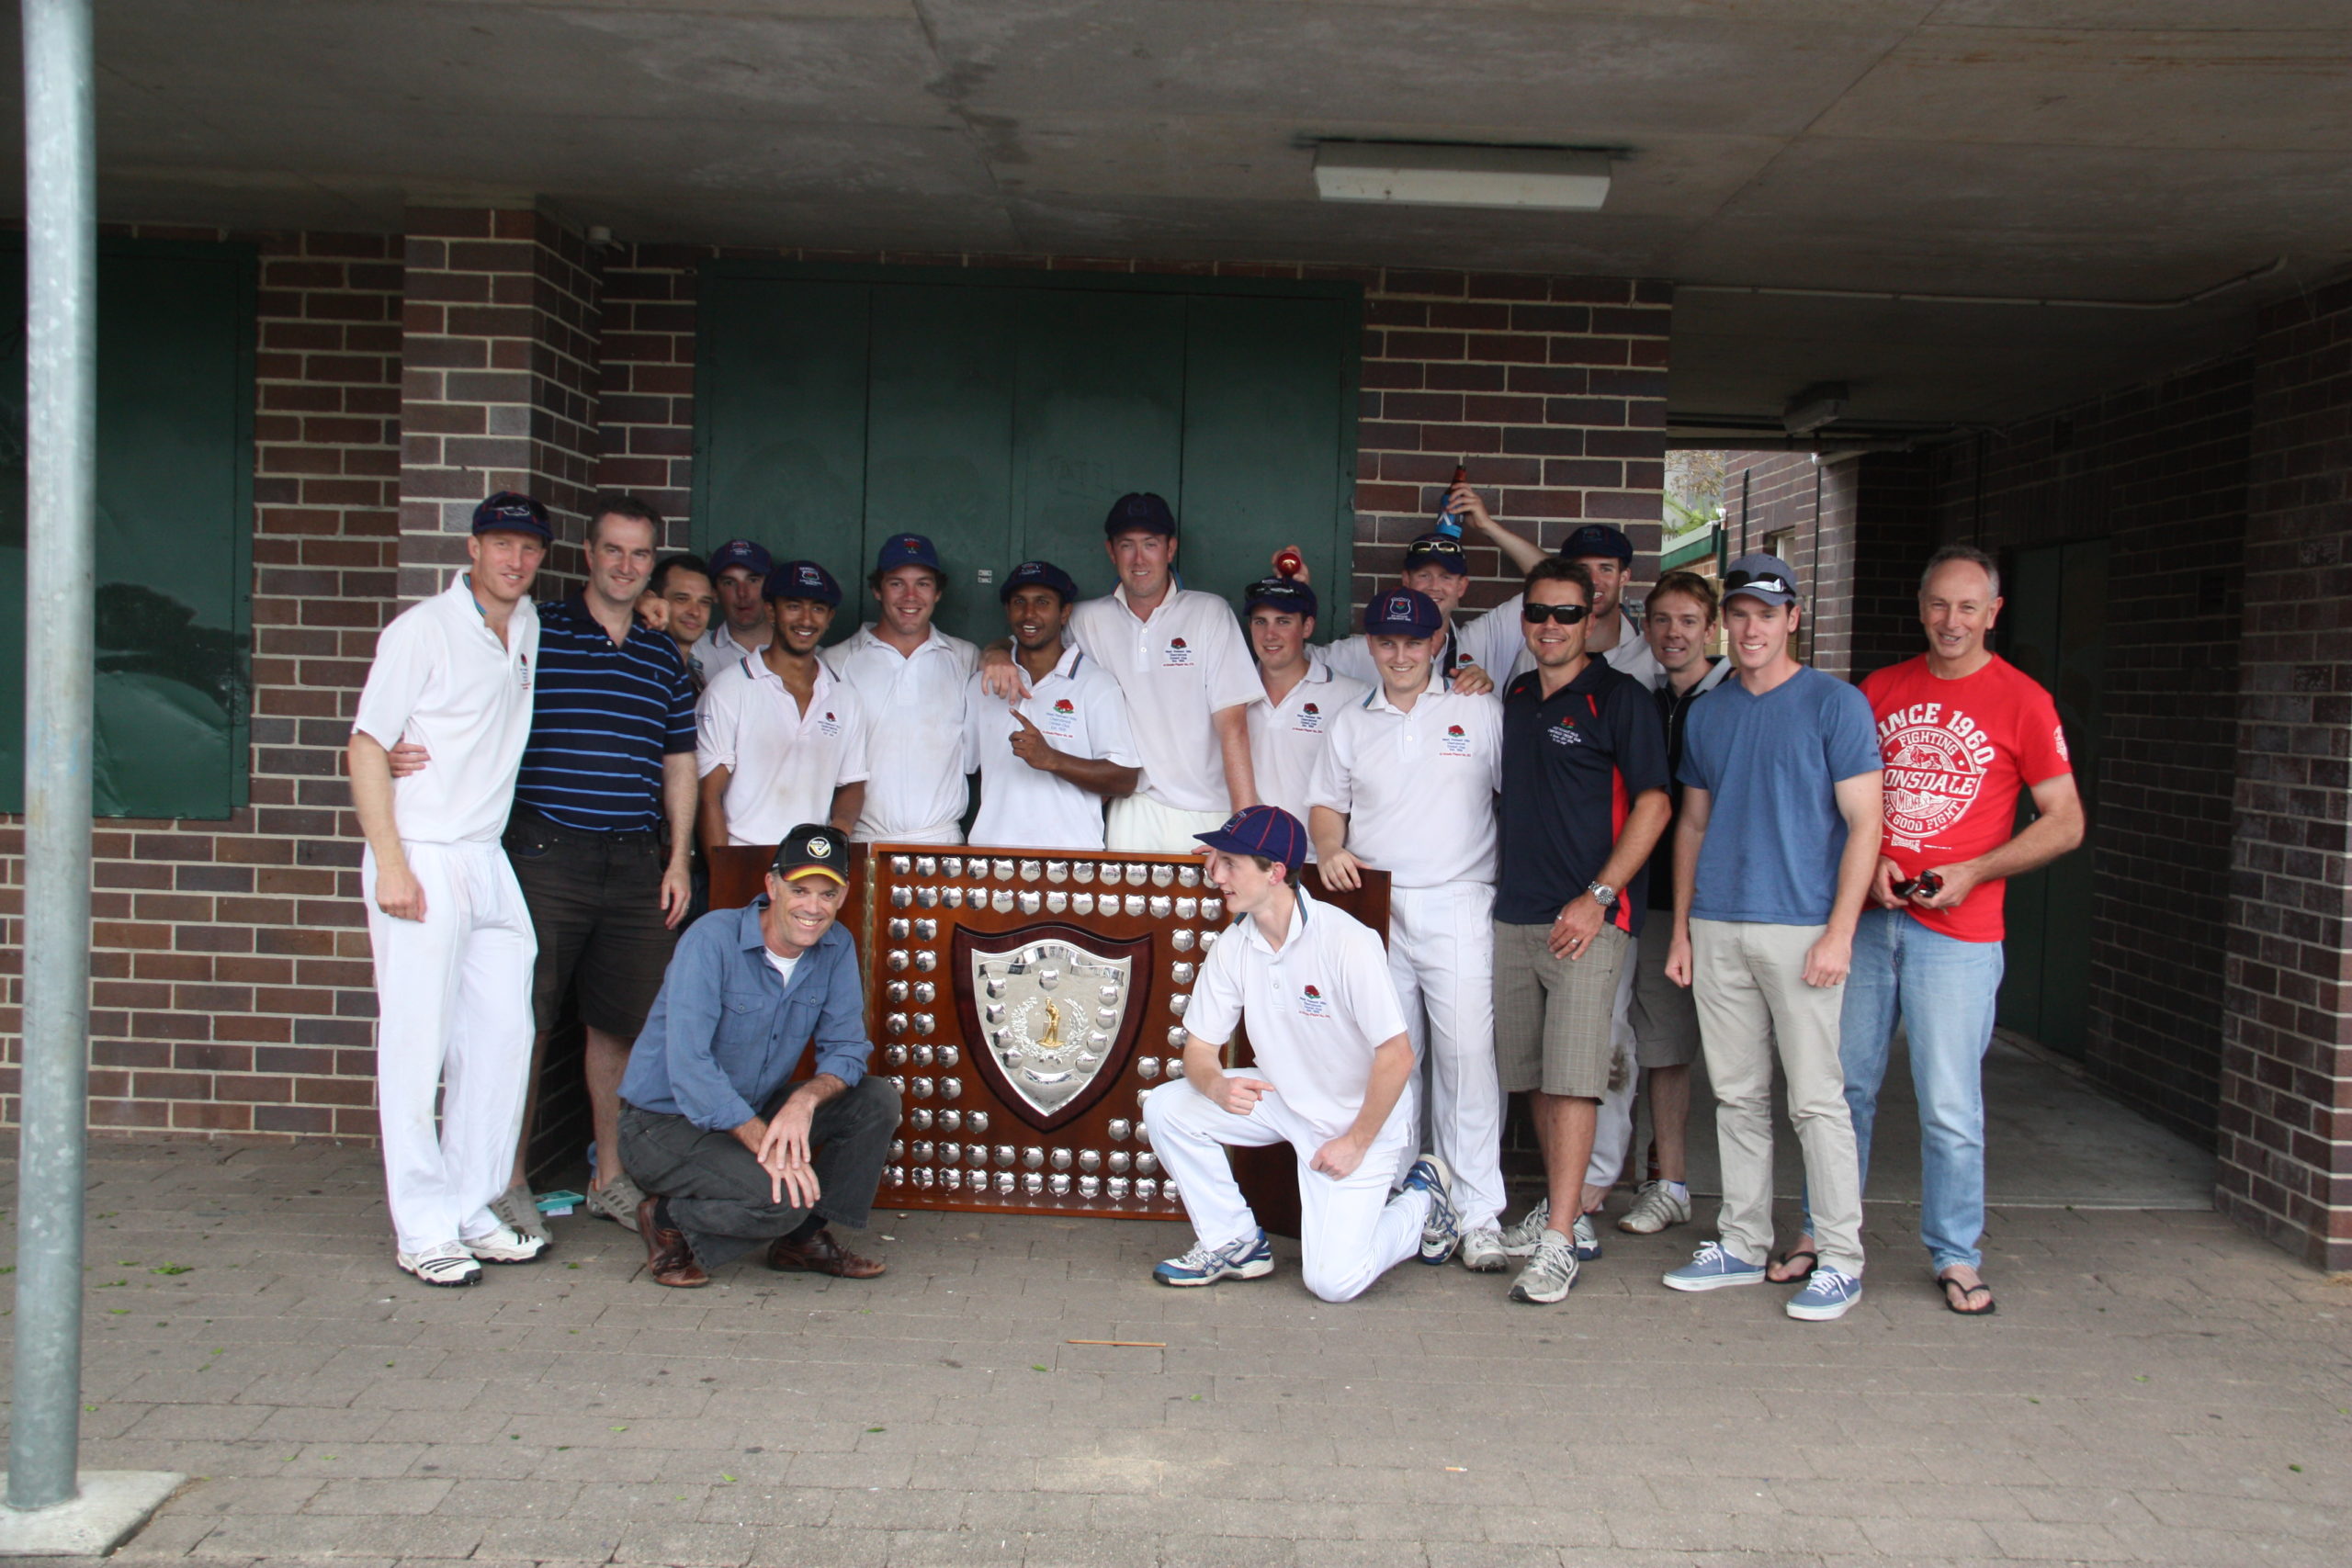 A1 Grade Premiers 2011/12 with the Rofe Shield @ Mark Taylor Oval Sunday 25th March 2012.